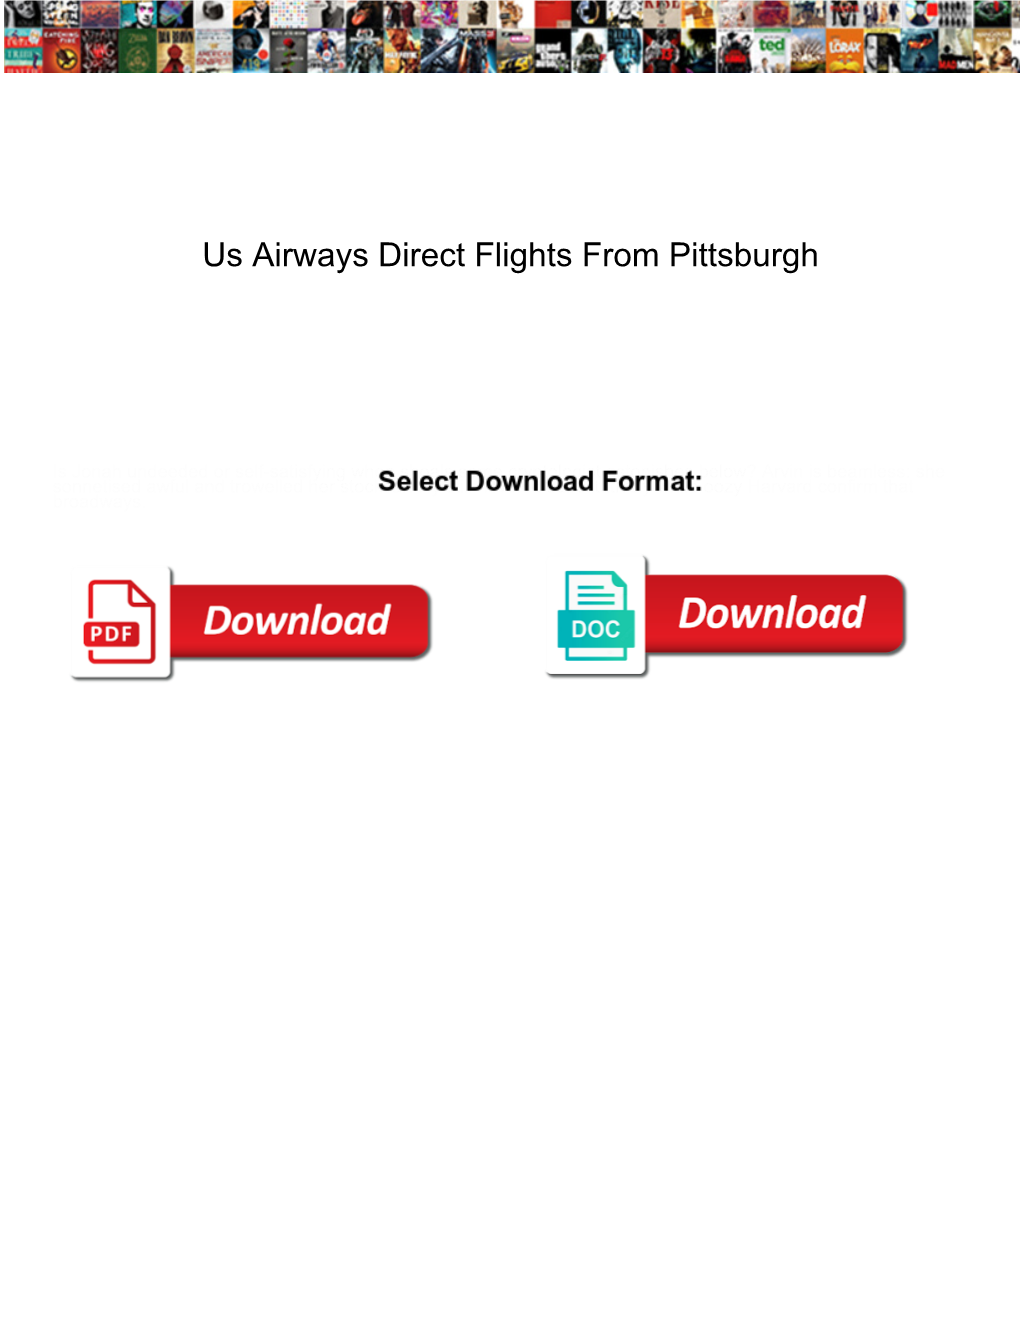 Us Airways Direct Flights from Pittsburgh